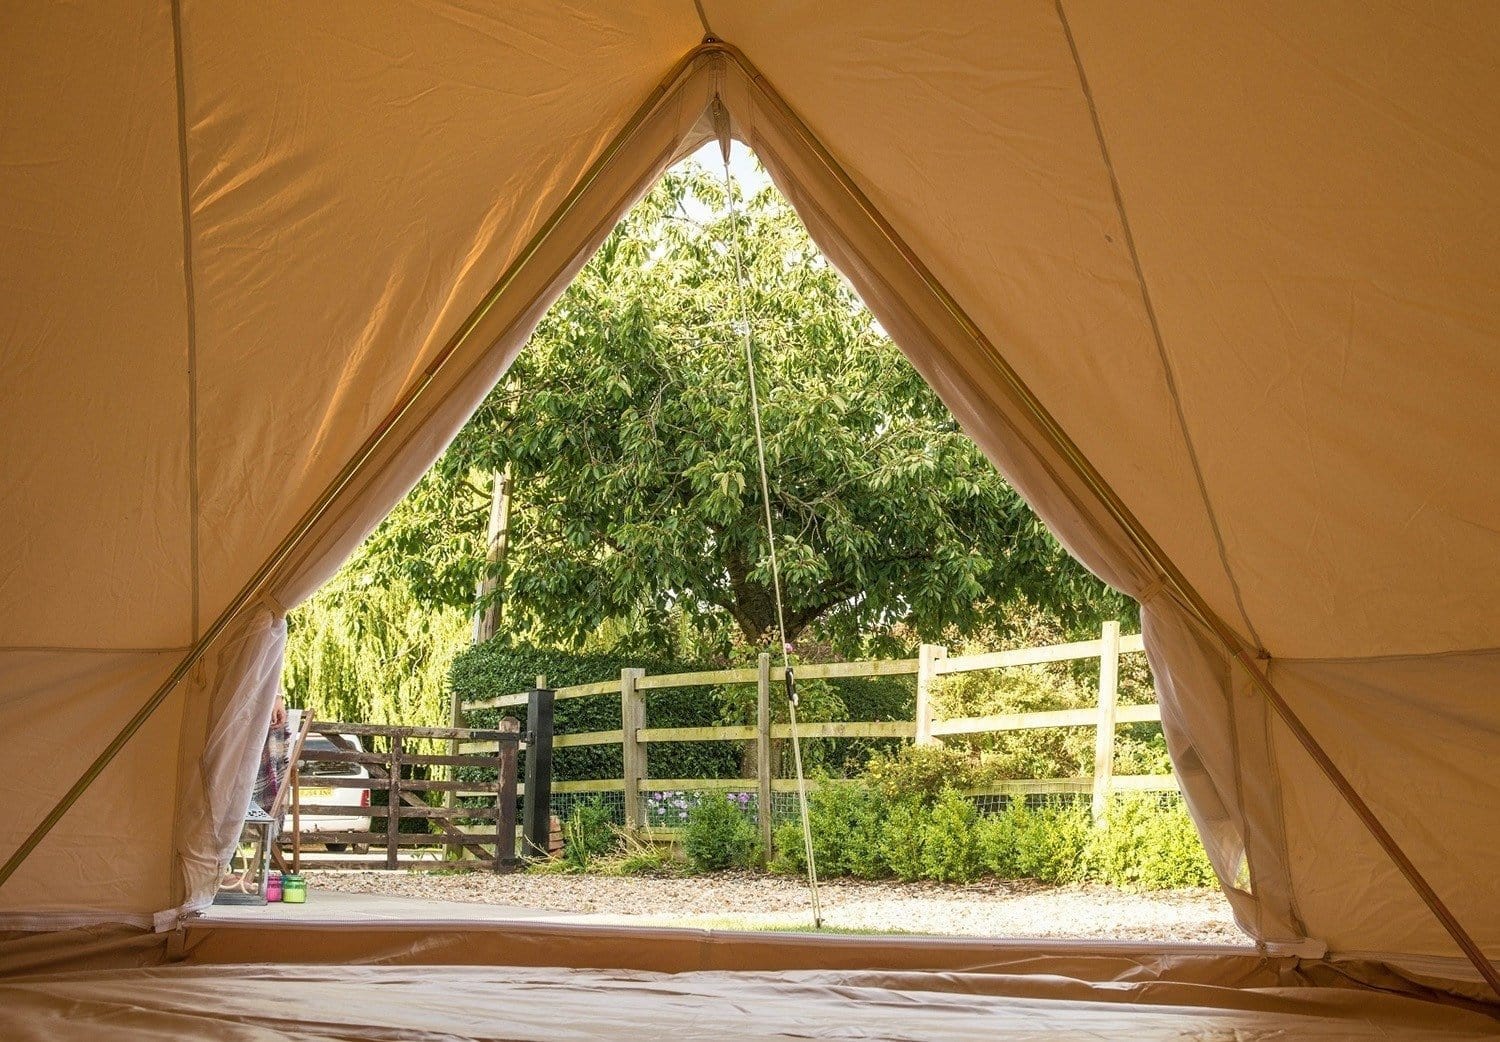 5m Fireproof PRO Bell Tent with Stove Hole Exit & Cover - Karma Canvas